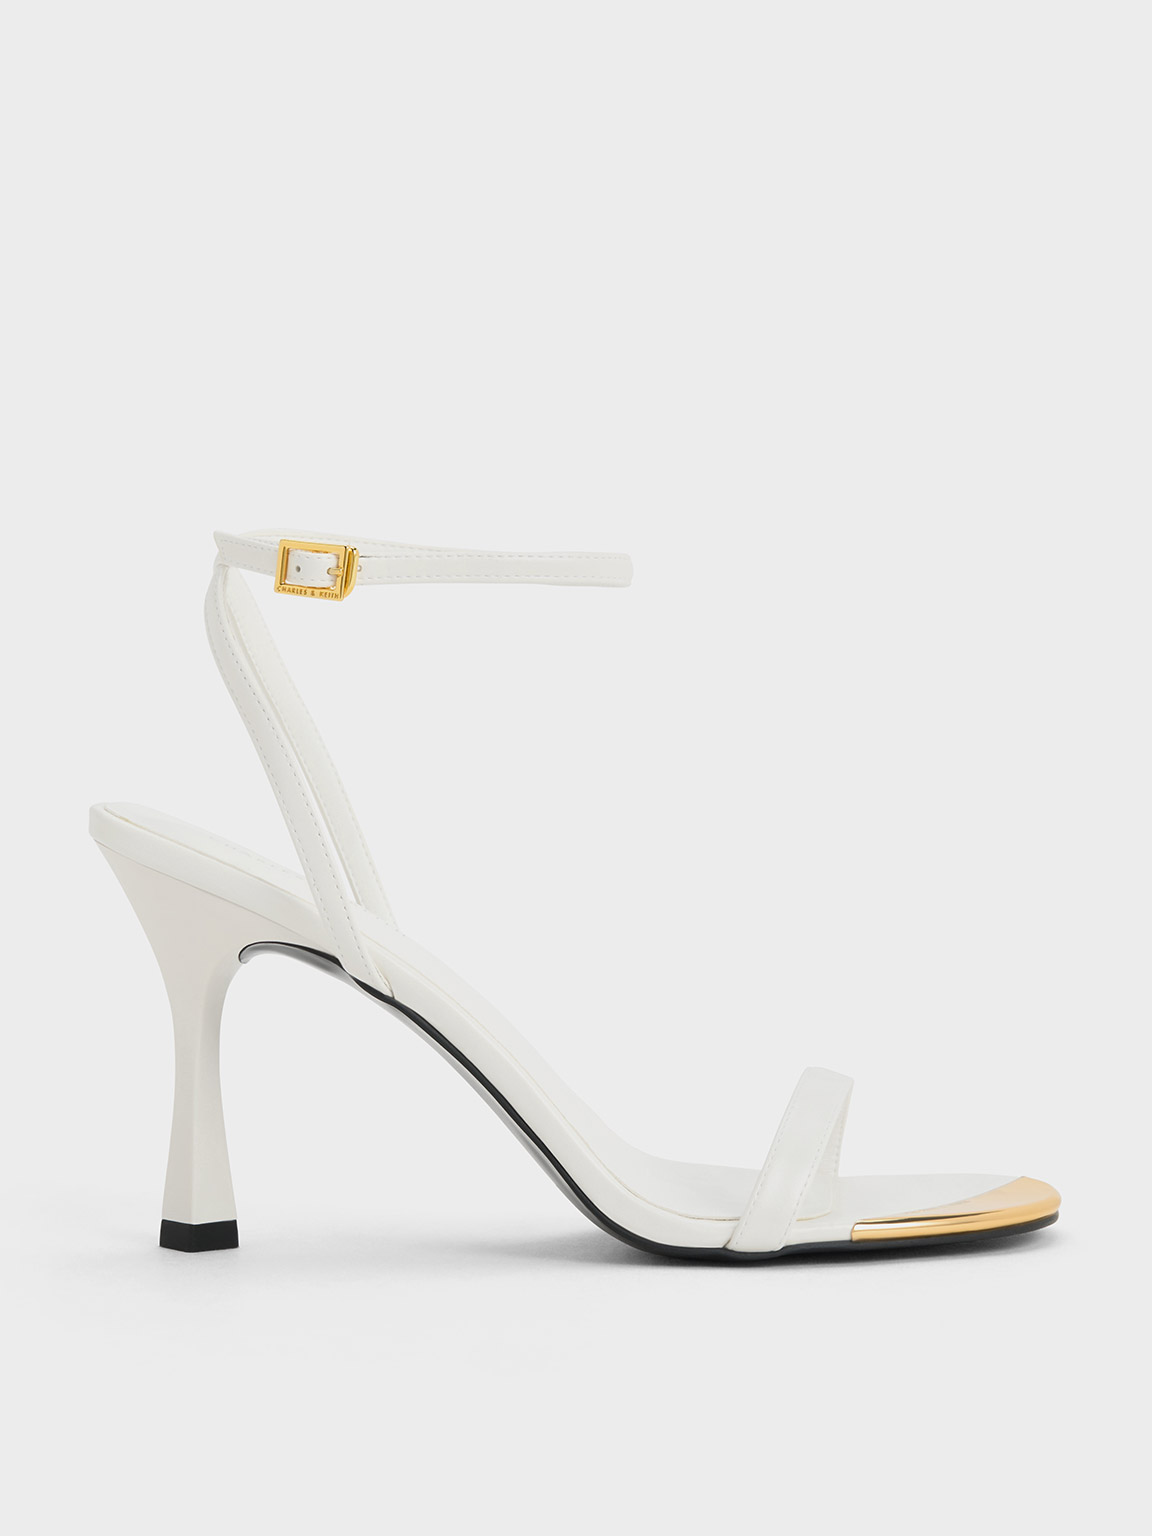 White Metallic Cap Ankle-Strap Heeled Sandals - CHARLES & KEITH PH